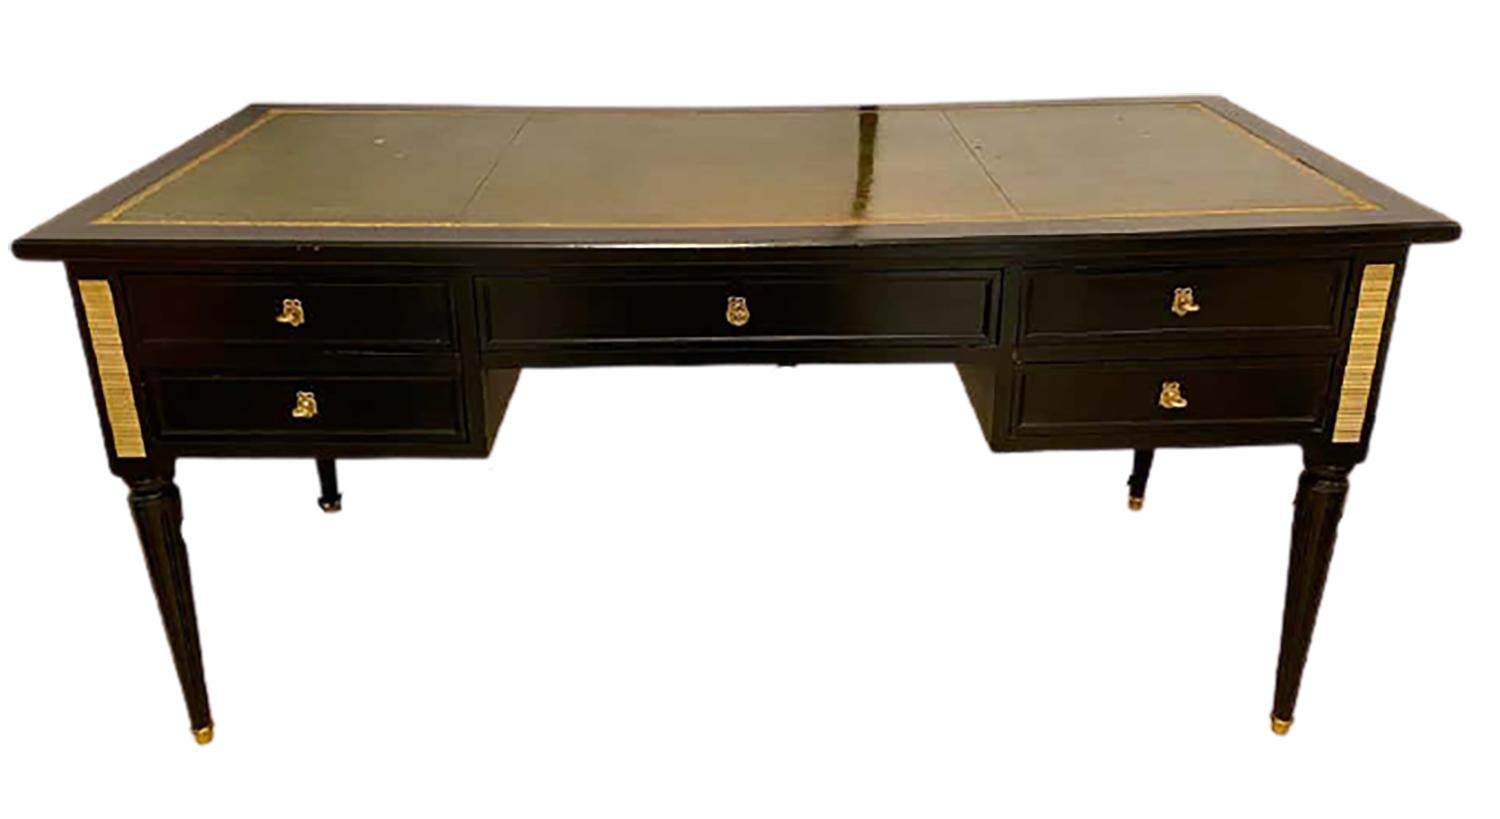 Louis XVI Style Hollywood Regency desk in Manner Maison Jansen. This exceptional ebony and bronze mounted large and impressive desk can easily sit center room as it is finished on all sides. Having a green Leather gilt tooled writing top with a